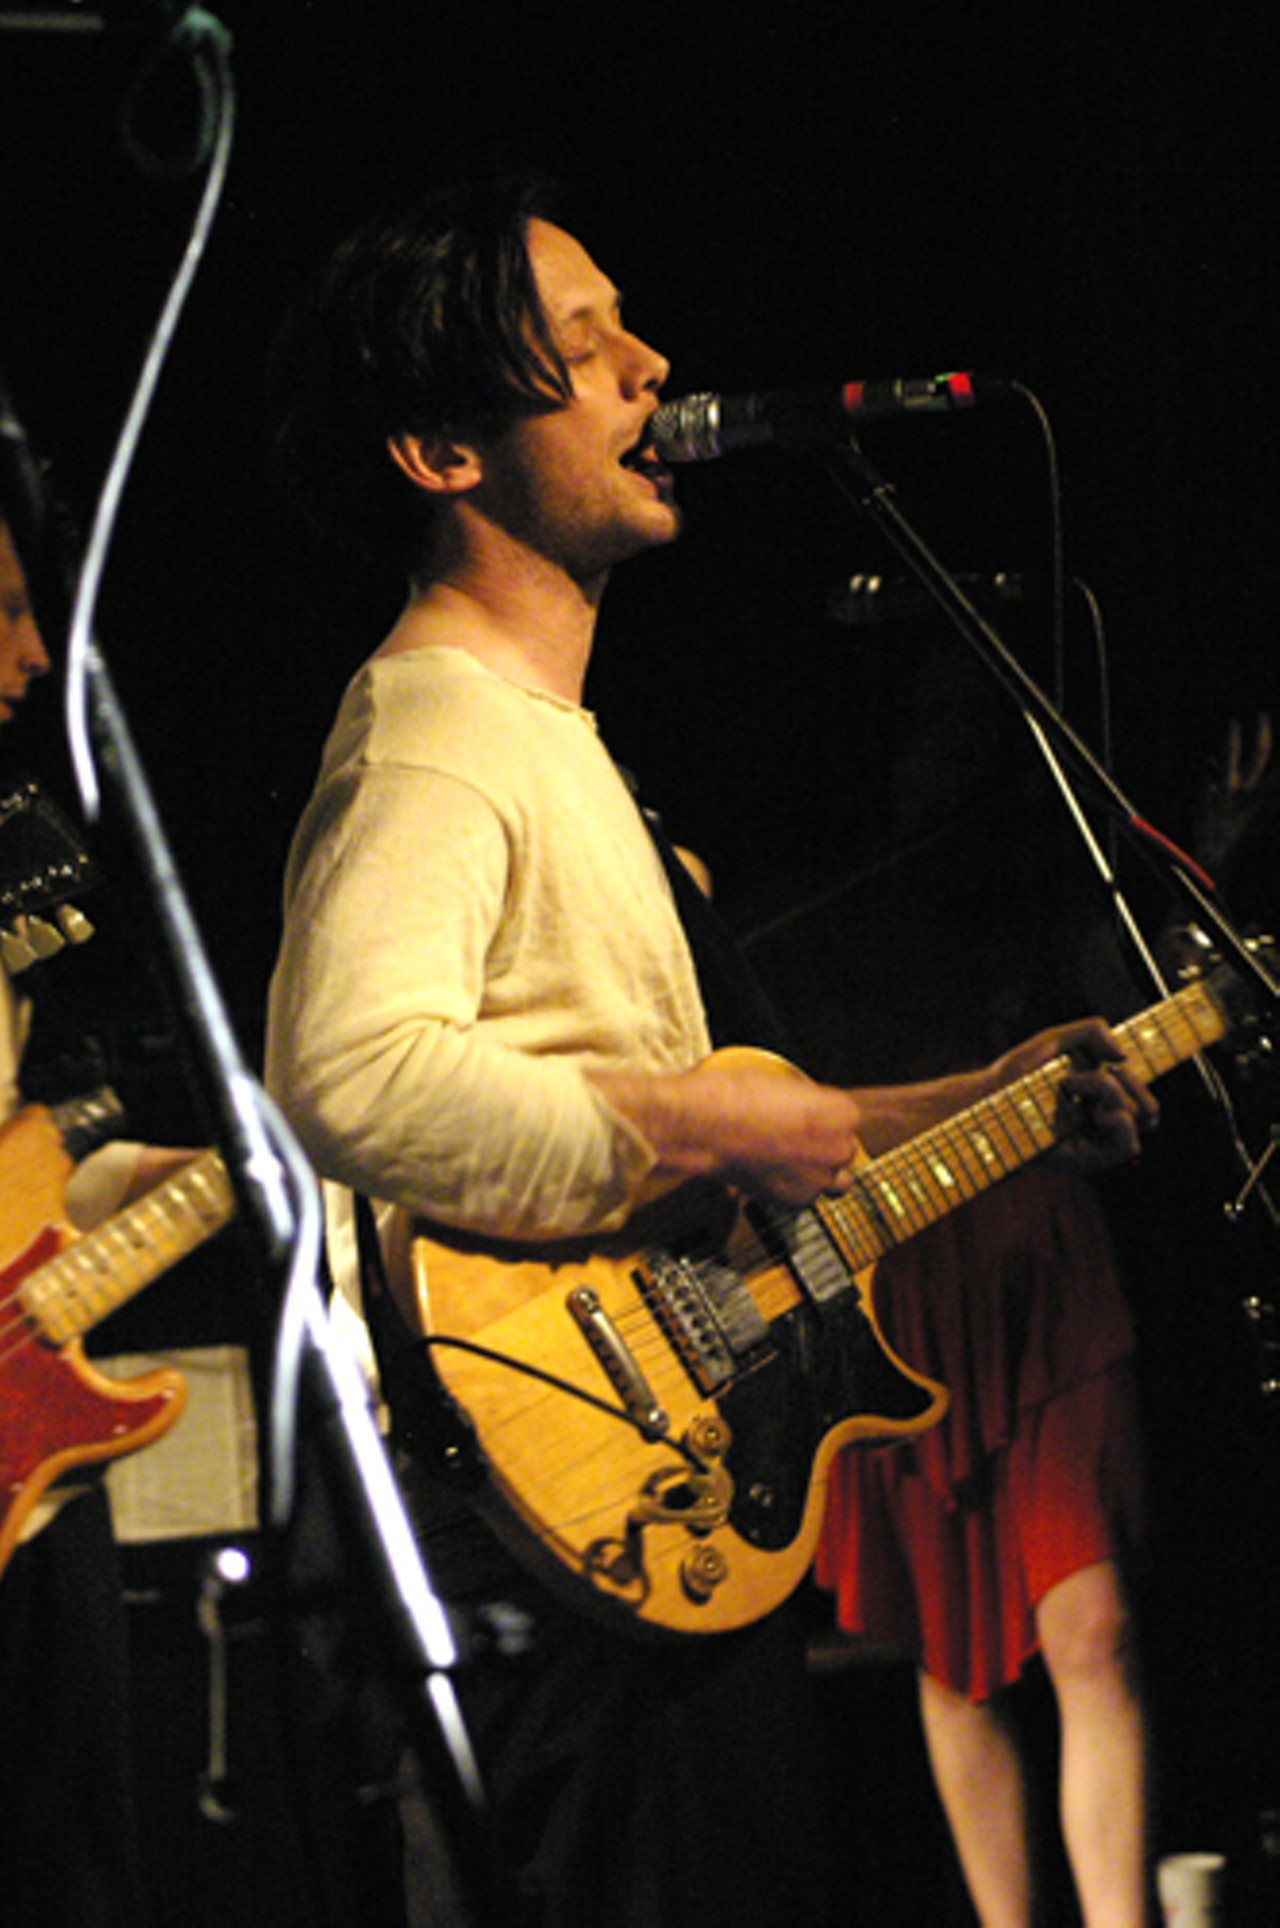 British Sea Power is fronted by Yan Wilkinson (shown) and his brother Hamilton Wilkinson (not pictured).